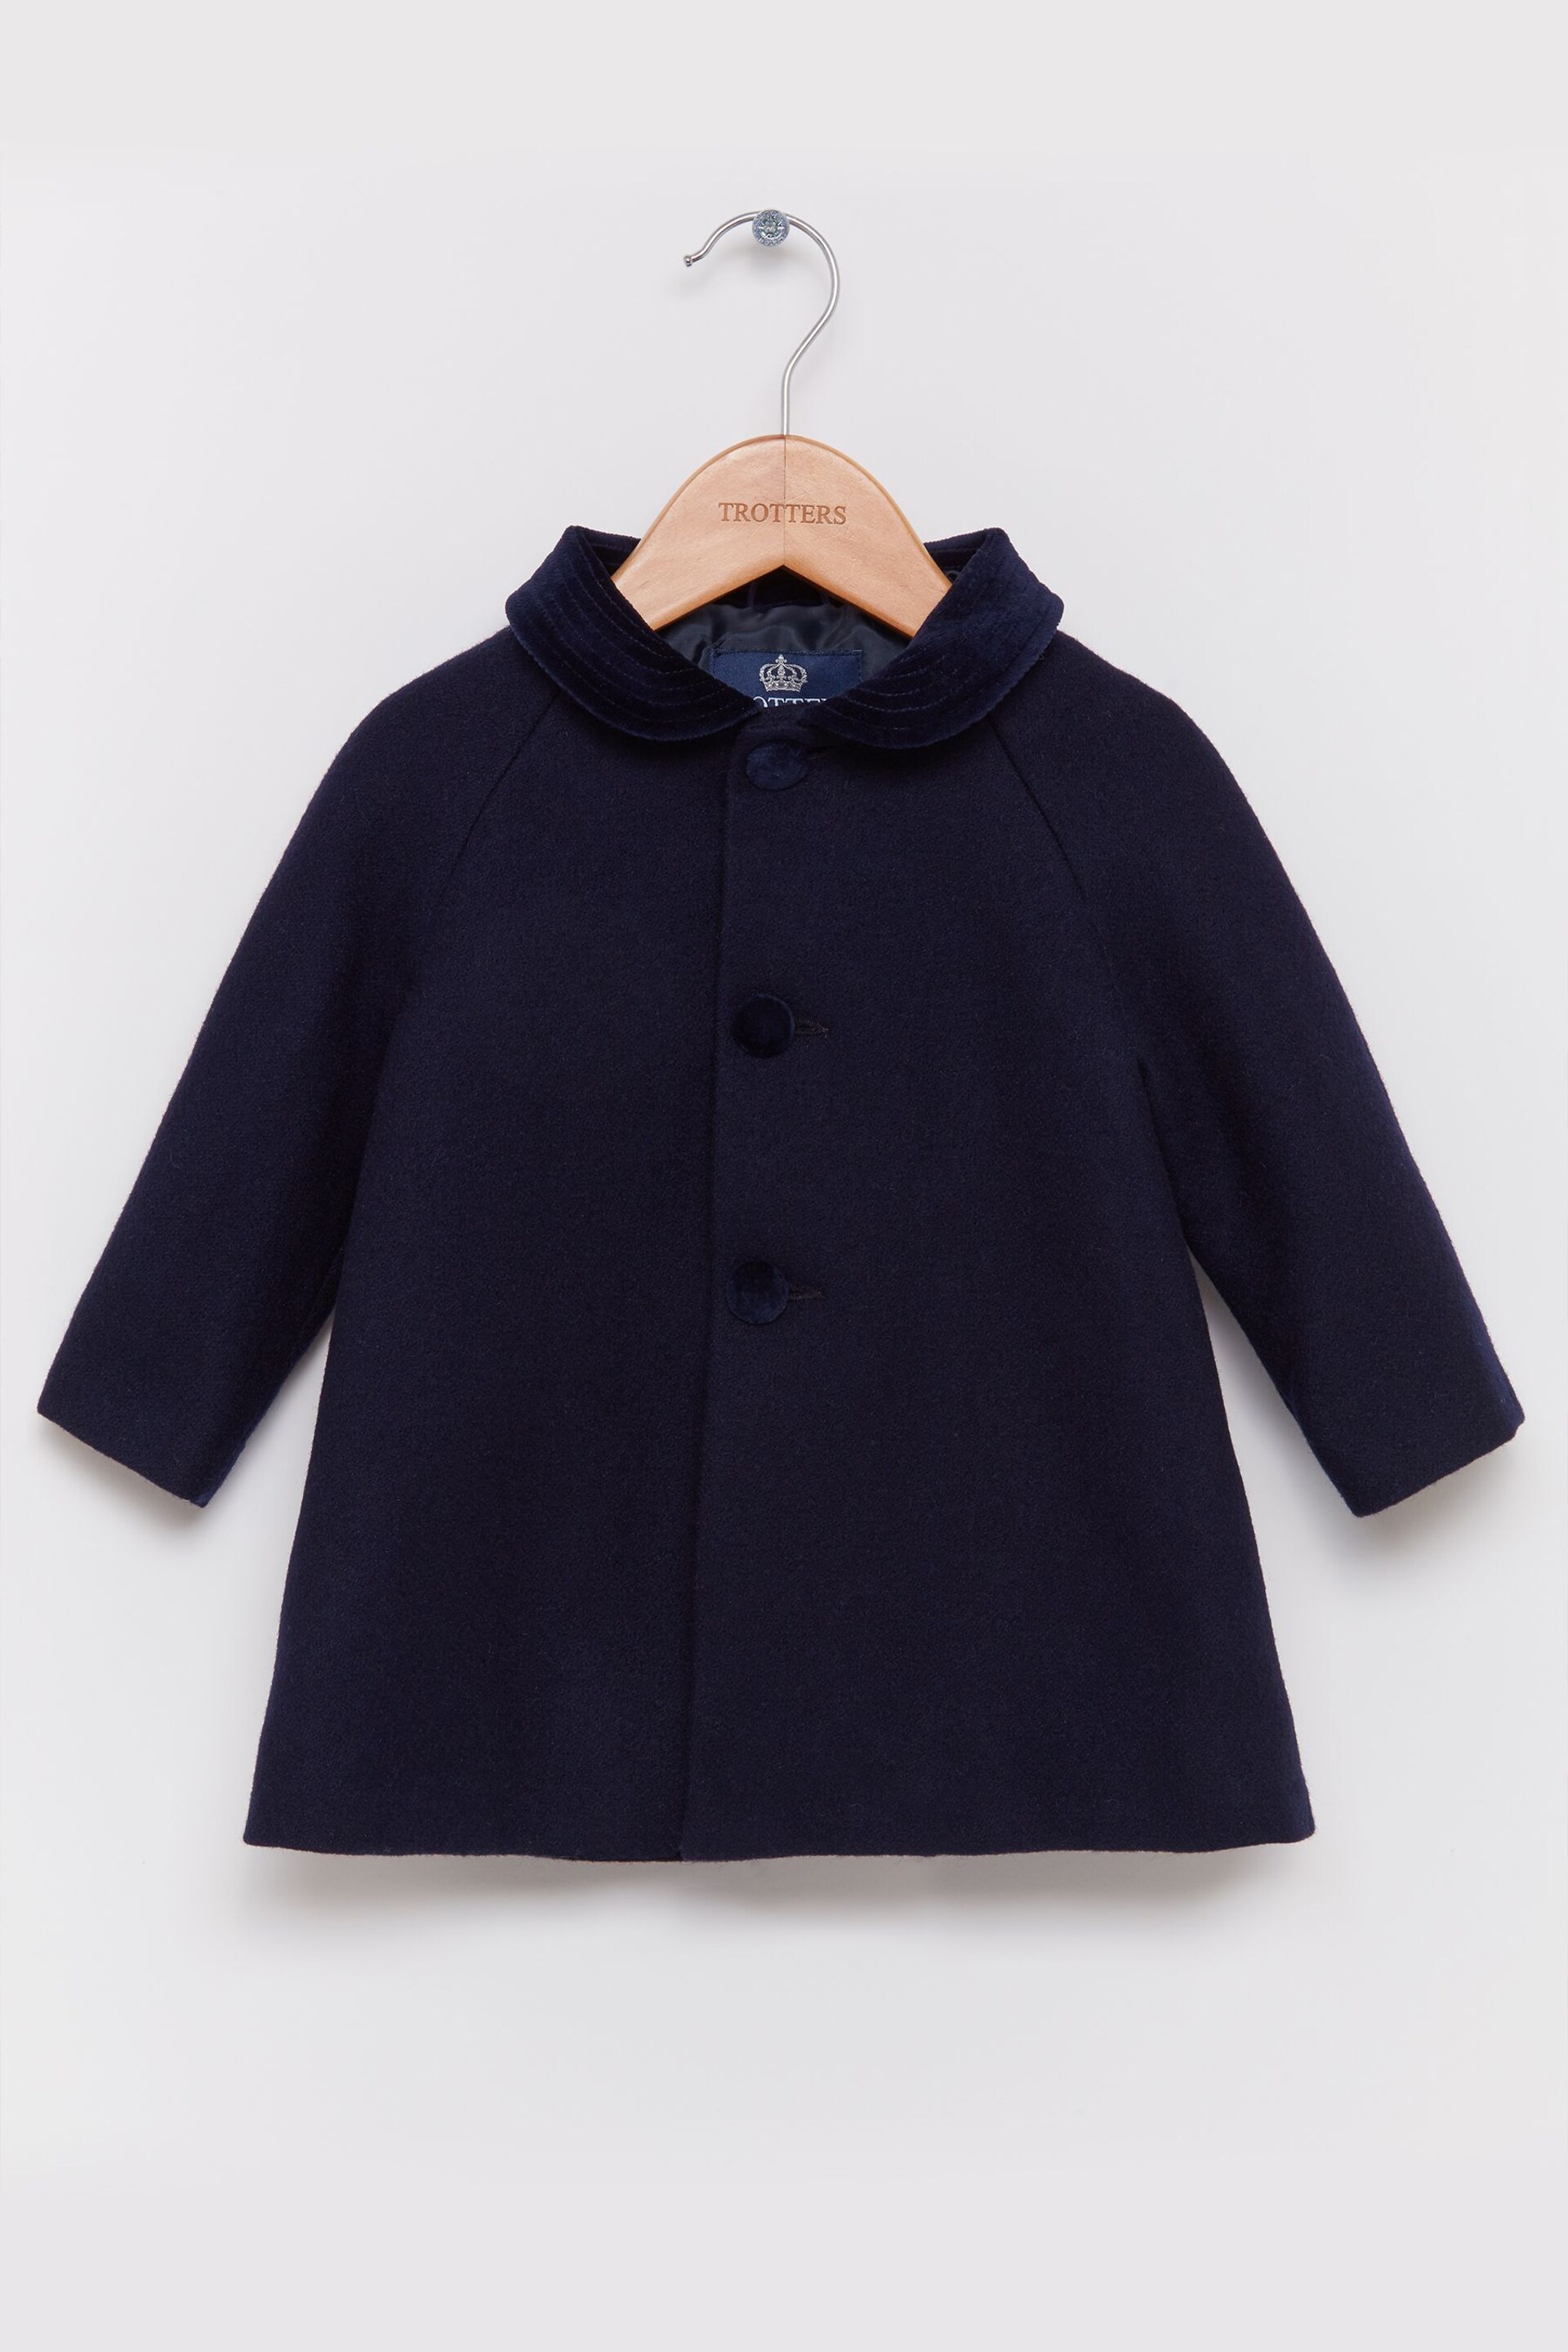 Trotters London Younger Boys Blue Classic Raglan Coat - Image 2 of 4